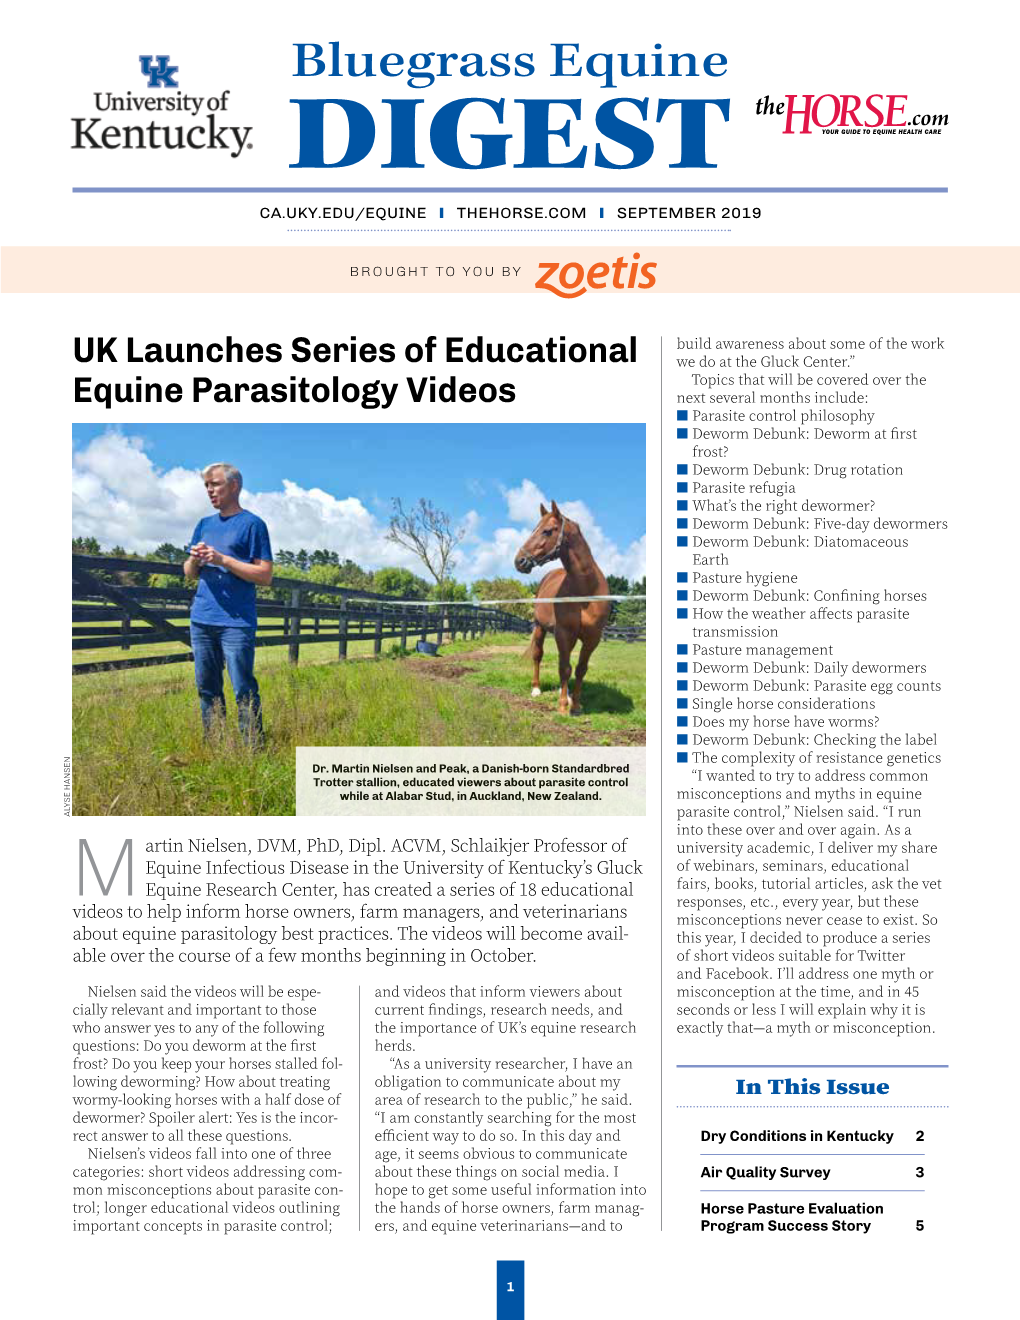 UK Launches Series of Educational Equine Parasitology Videos